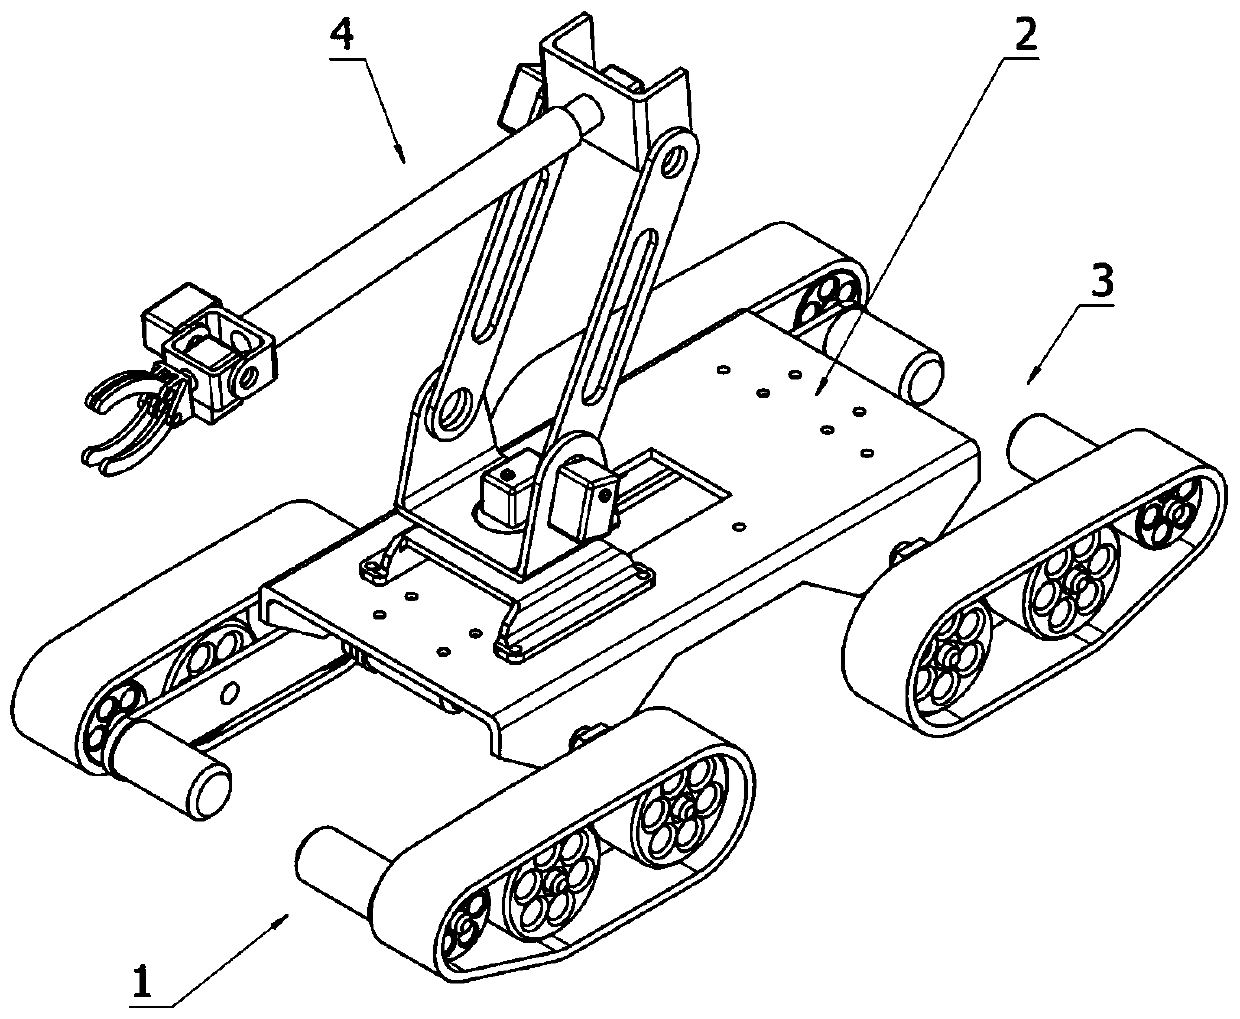 Crawler-type robot with function of climbing stairs